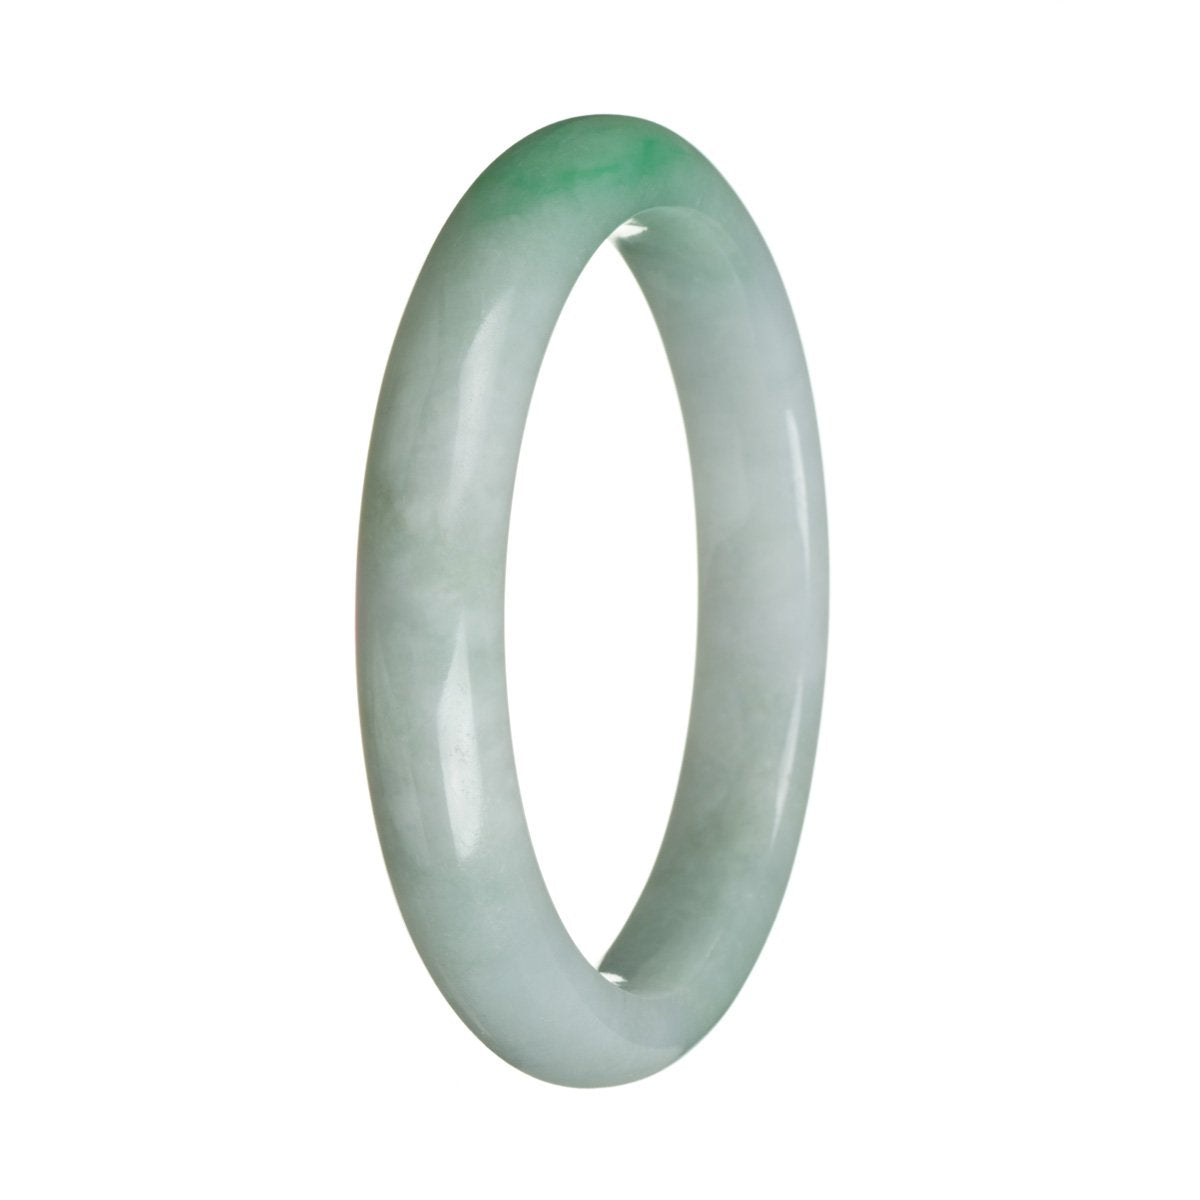 A close-up photo of a stunning green Burmese jade bangle, certified as natural and featuring a vibrant apple green color. The bangle is semi-round in shape and has a diameter of 63mm. The brand name "MAYS" is also mentioned.